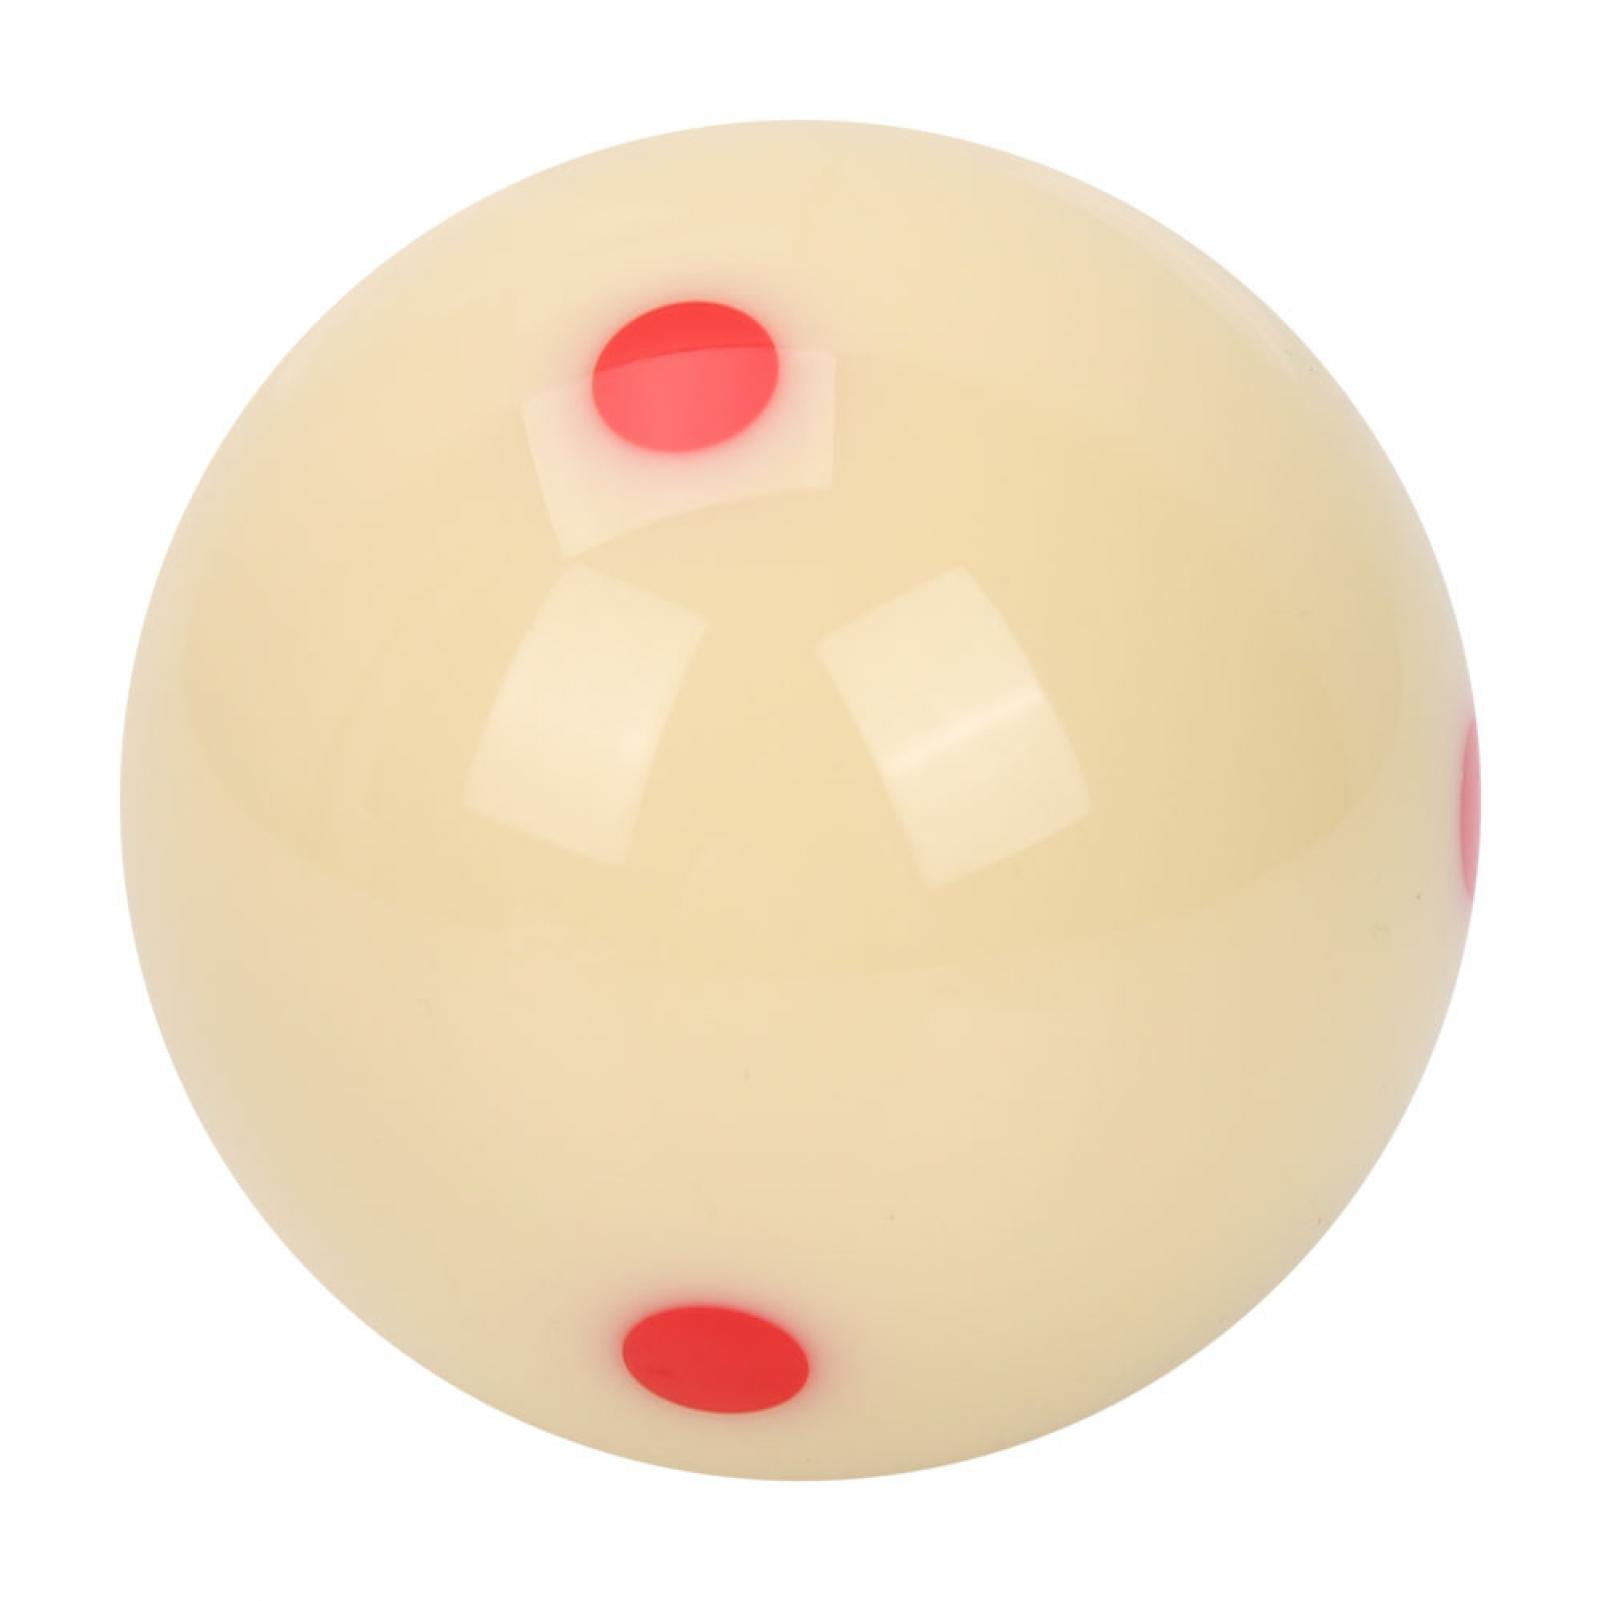 Red Dot Pool Ball Ball for Billiard Room Practicing for Game Room Training 